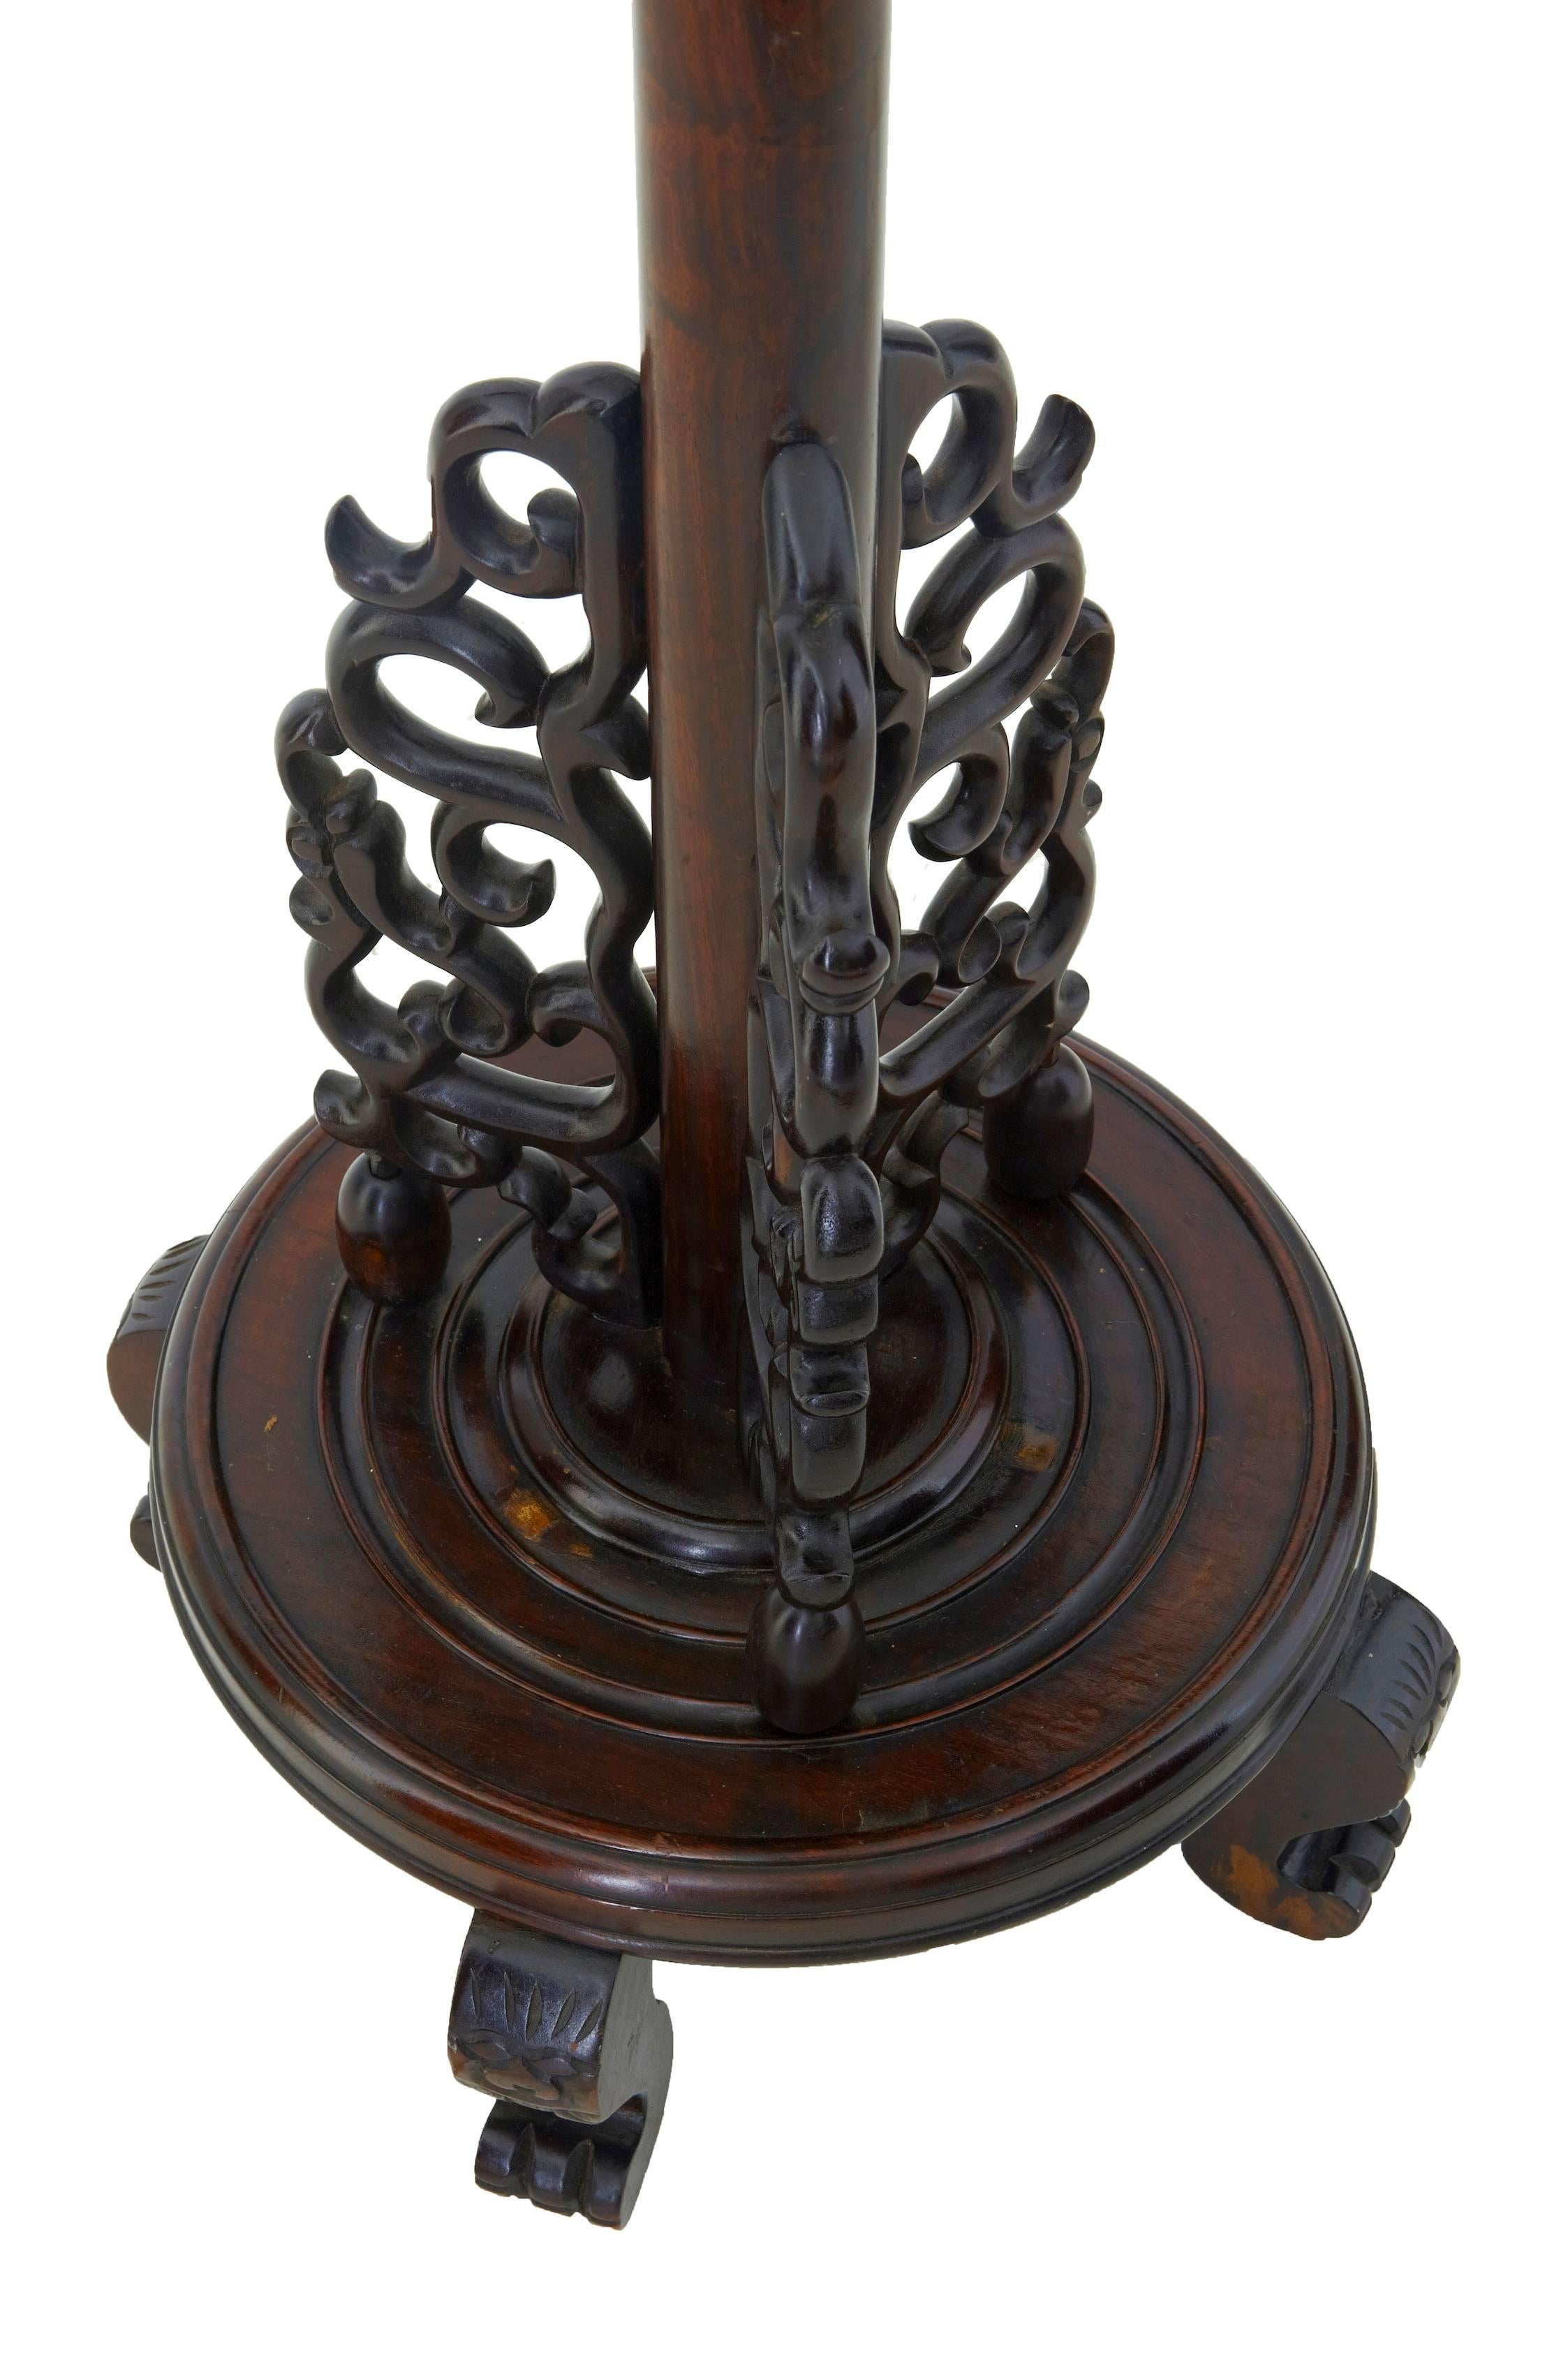 Good quality floor lamp, circa 1920.
Carved in heavy hardwood.
Carved dragons head forming the outlet for the light fitment, long stem leading down to three scrolled carved elements, round base, standing on 4 feet.

This item has just been re